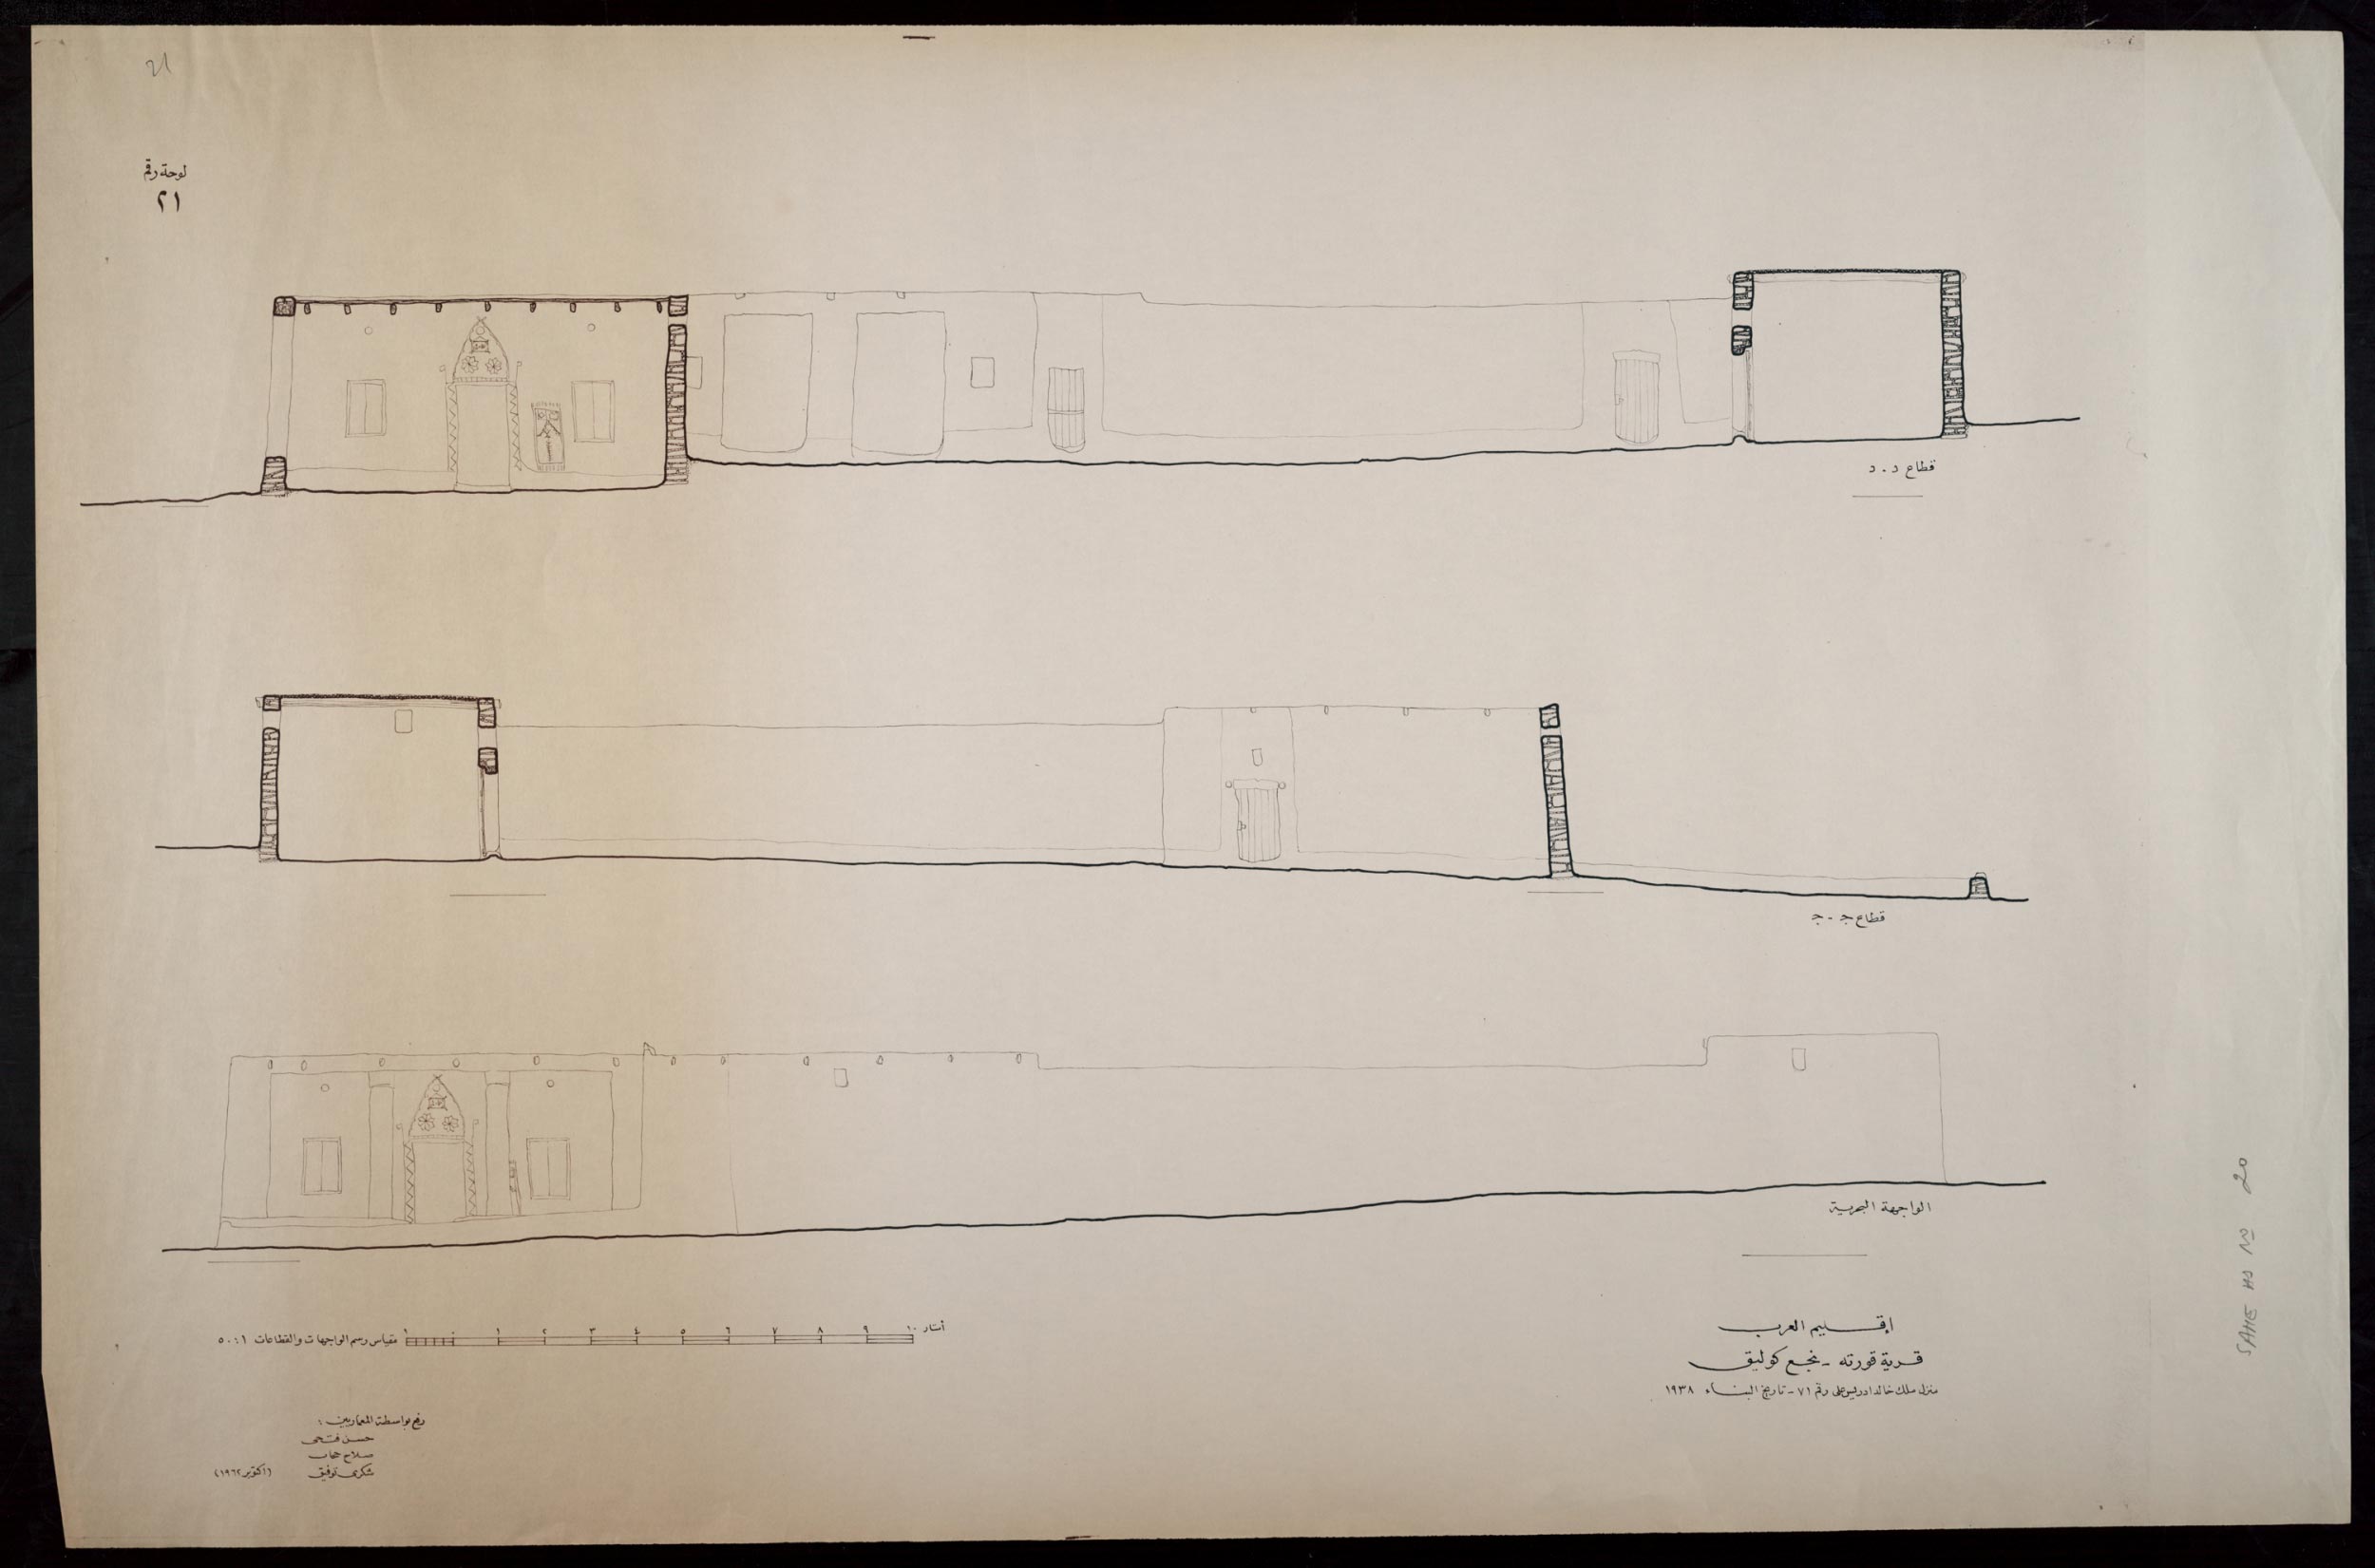 North elevational drawing and sections.